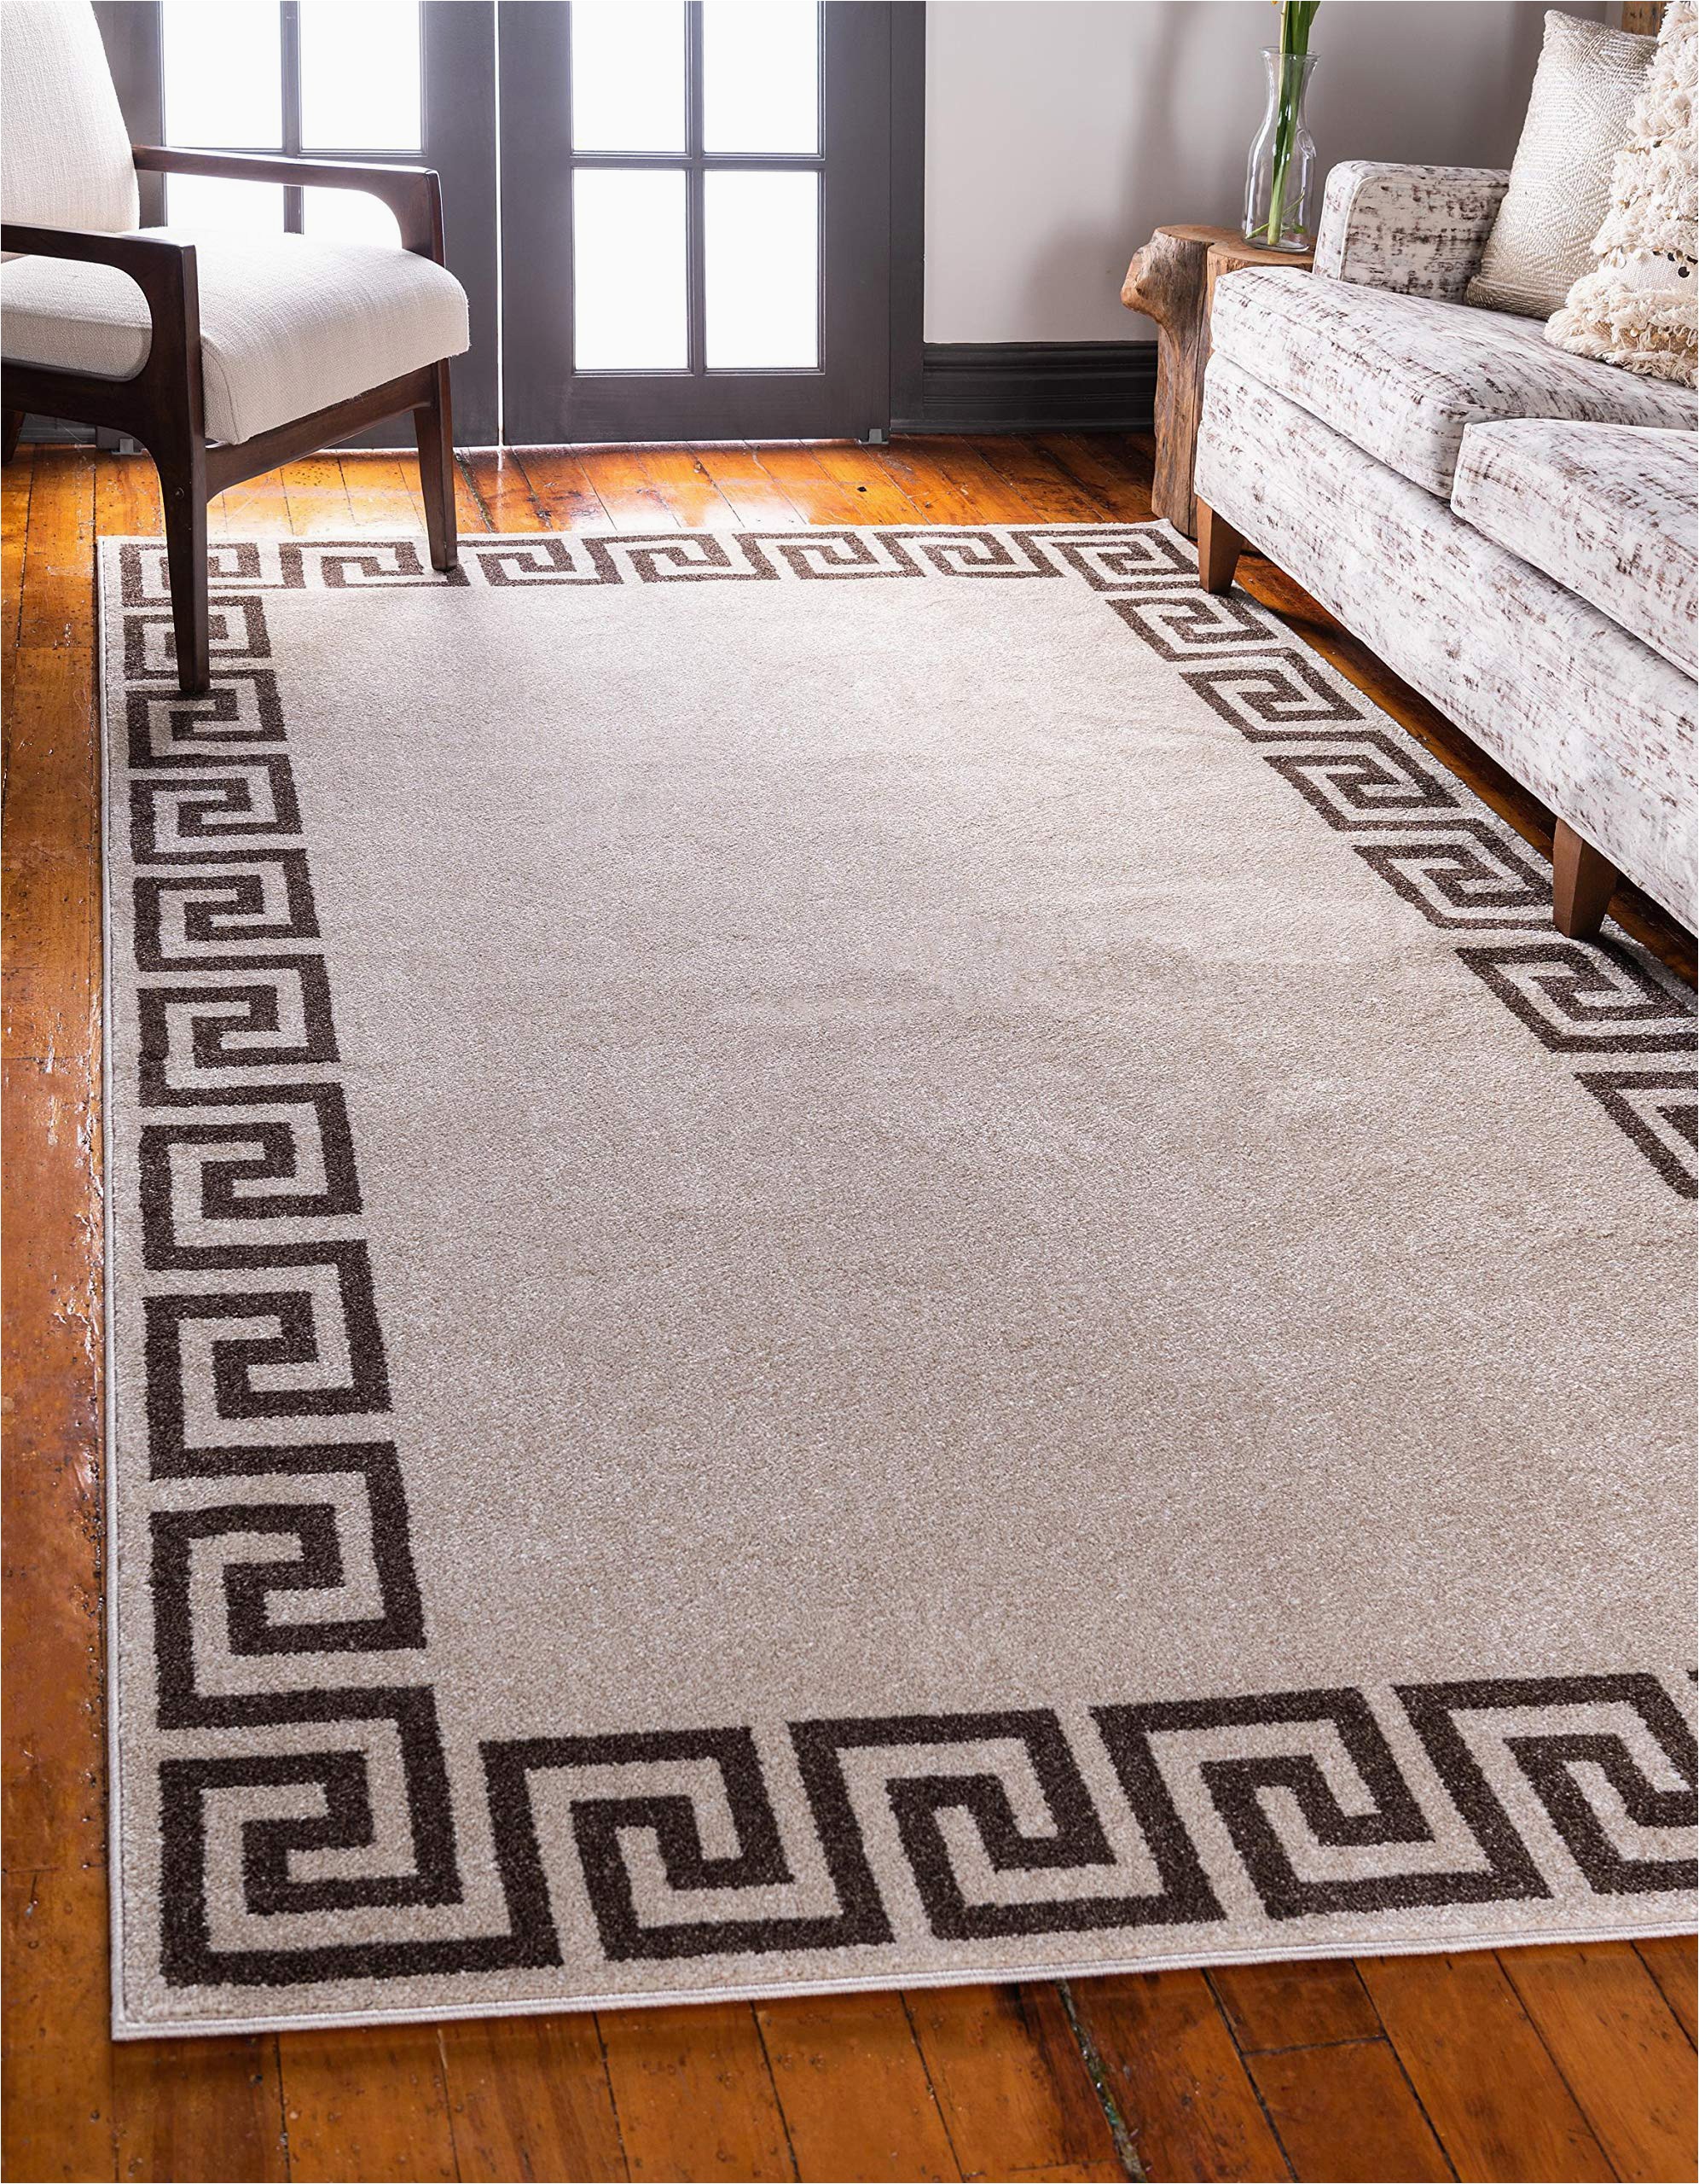 5 X 8 area Rugs with Rubber Backing Unique Loom athens Geometric Casual area Rug 5 0 X 8 0 Beige Brown